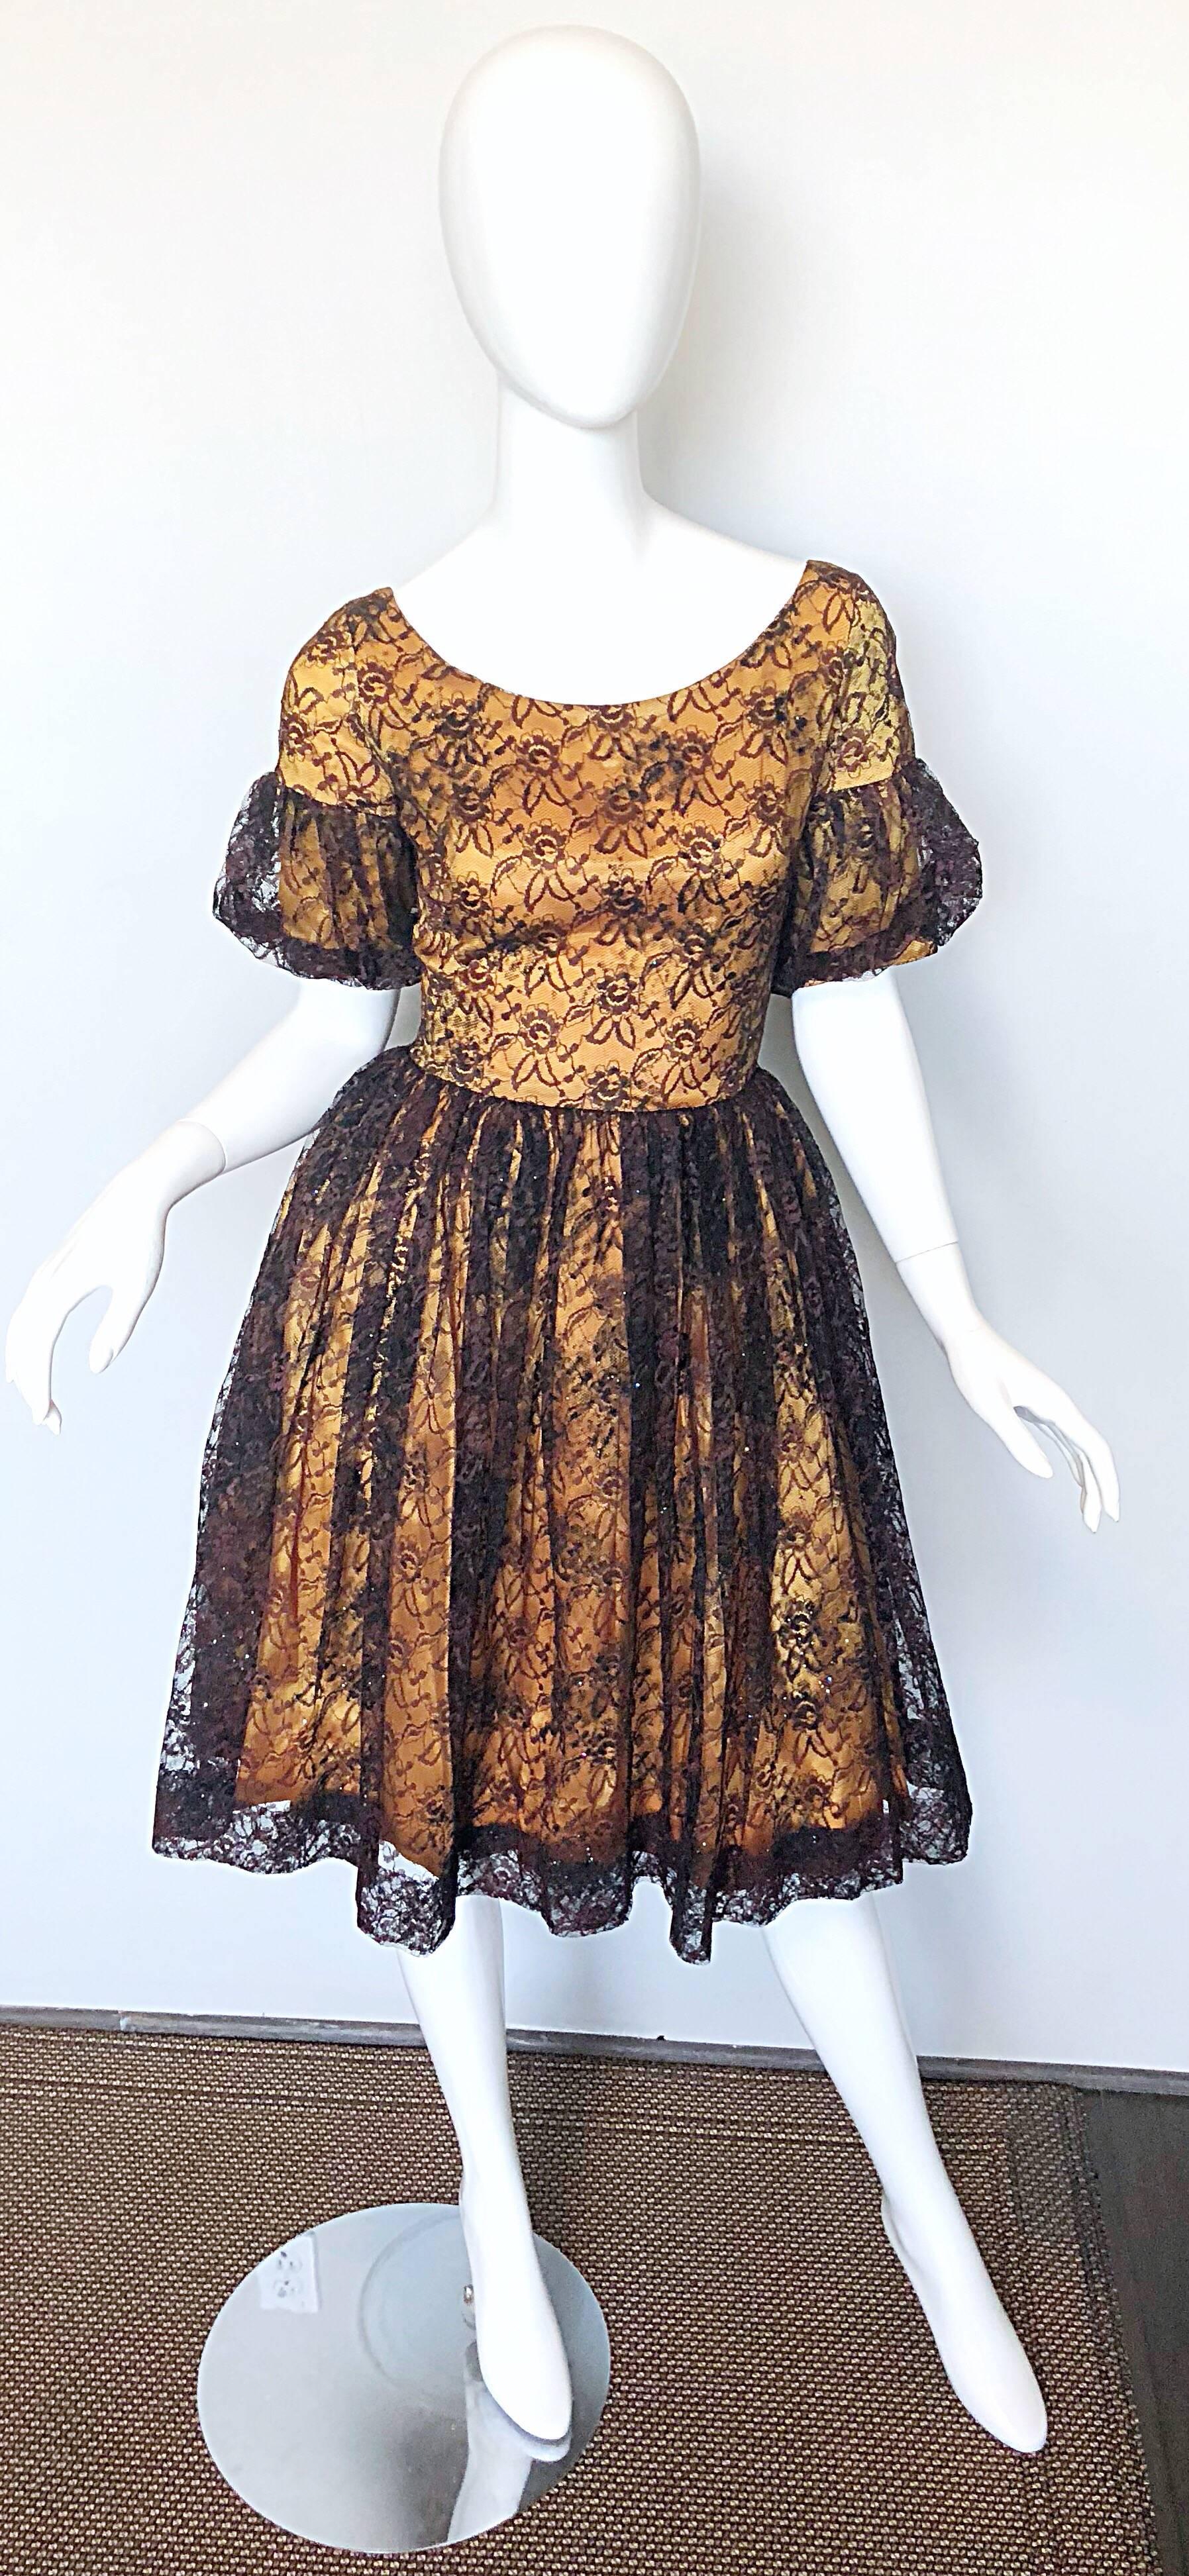 Gorgeous 1950s black and gold silk lace fit n' flare cocktail dress! Features luxurious black French lace with a golden satin underlay, with sparkles of colorful glitter sporadically thorughout. Pretty flounced sleeves. Fitted bodice with a